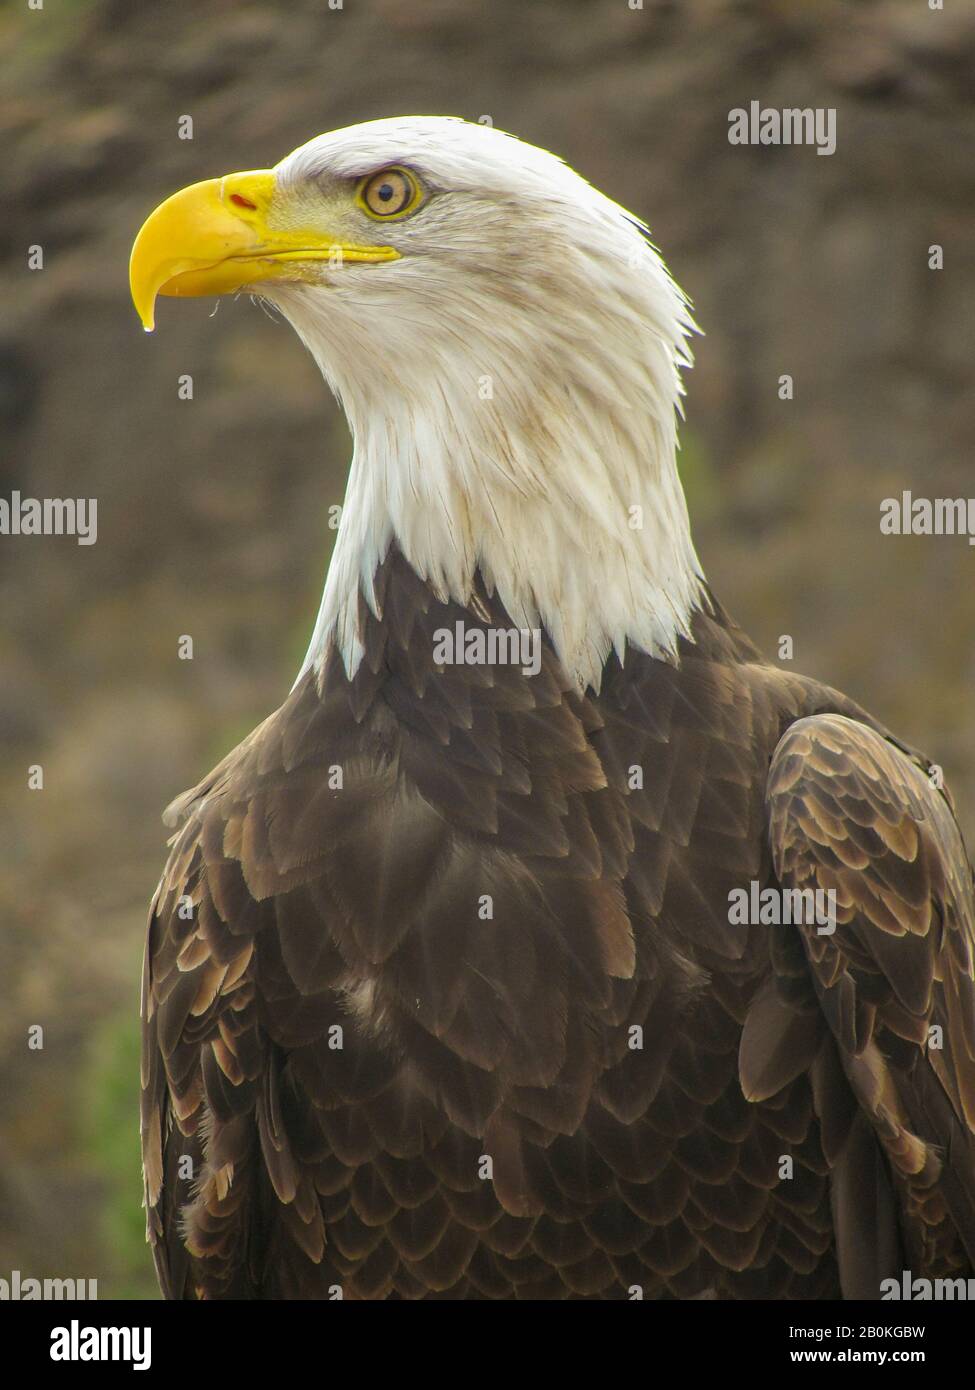 American eagle, symbol of a nation, United States of America Stock Photo